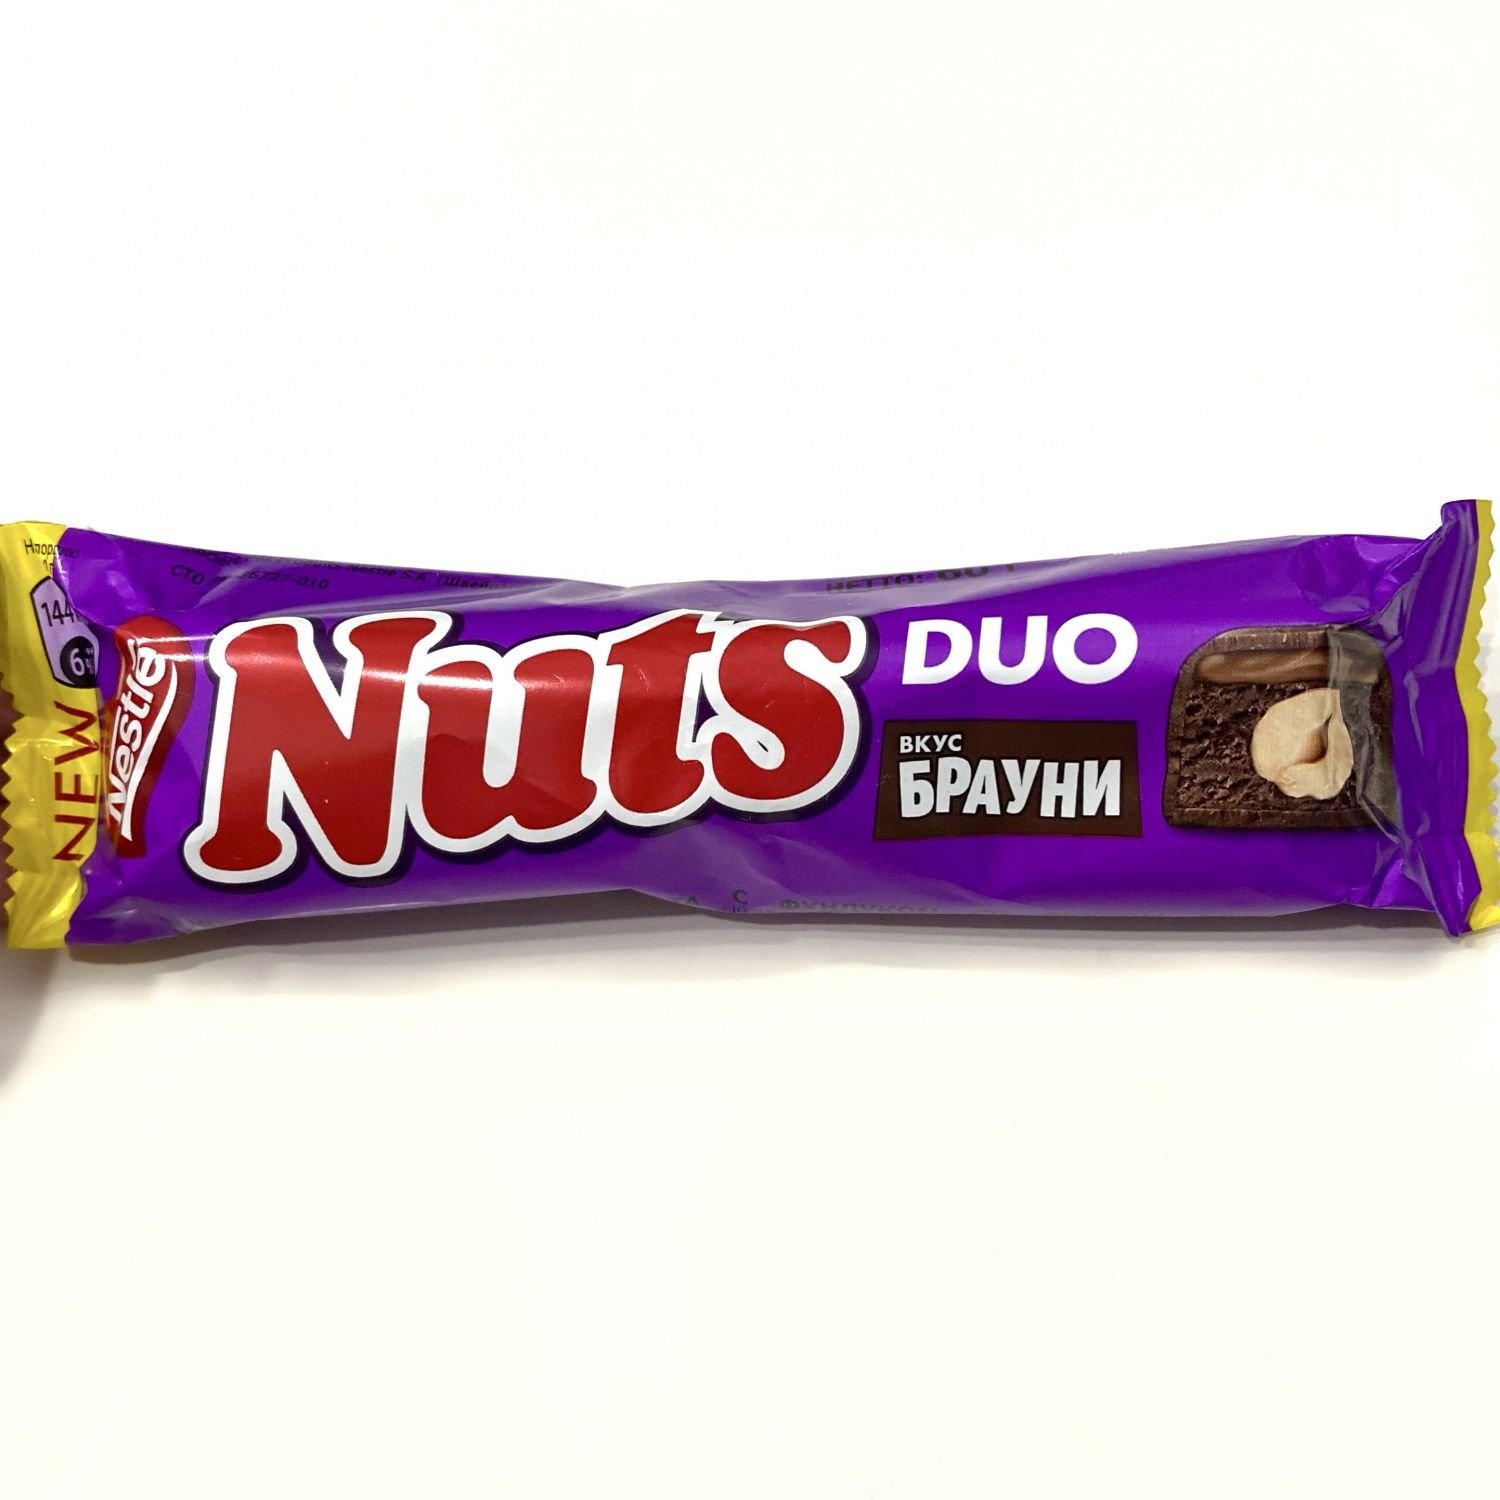 Батончик нат. Батончик натс Duo. Батончик Nuts Duo Nestle,. Nuts Duo Crunch. Nuts Duo Брауни.